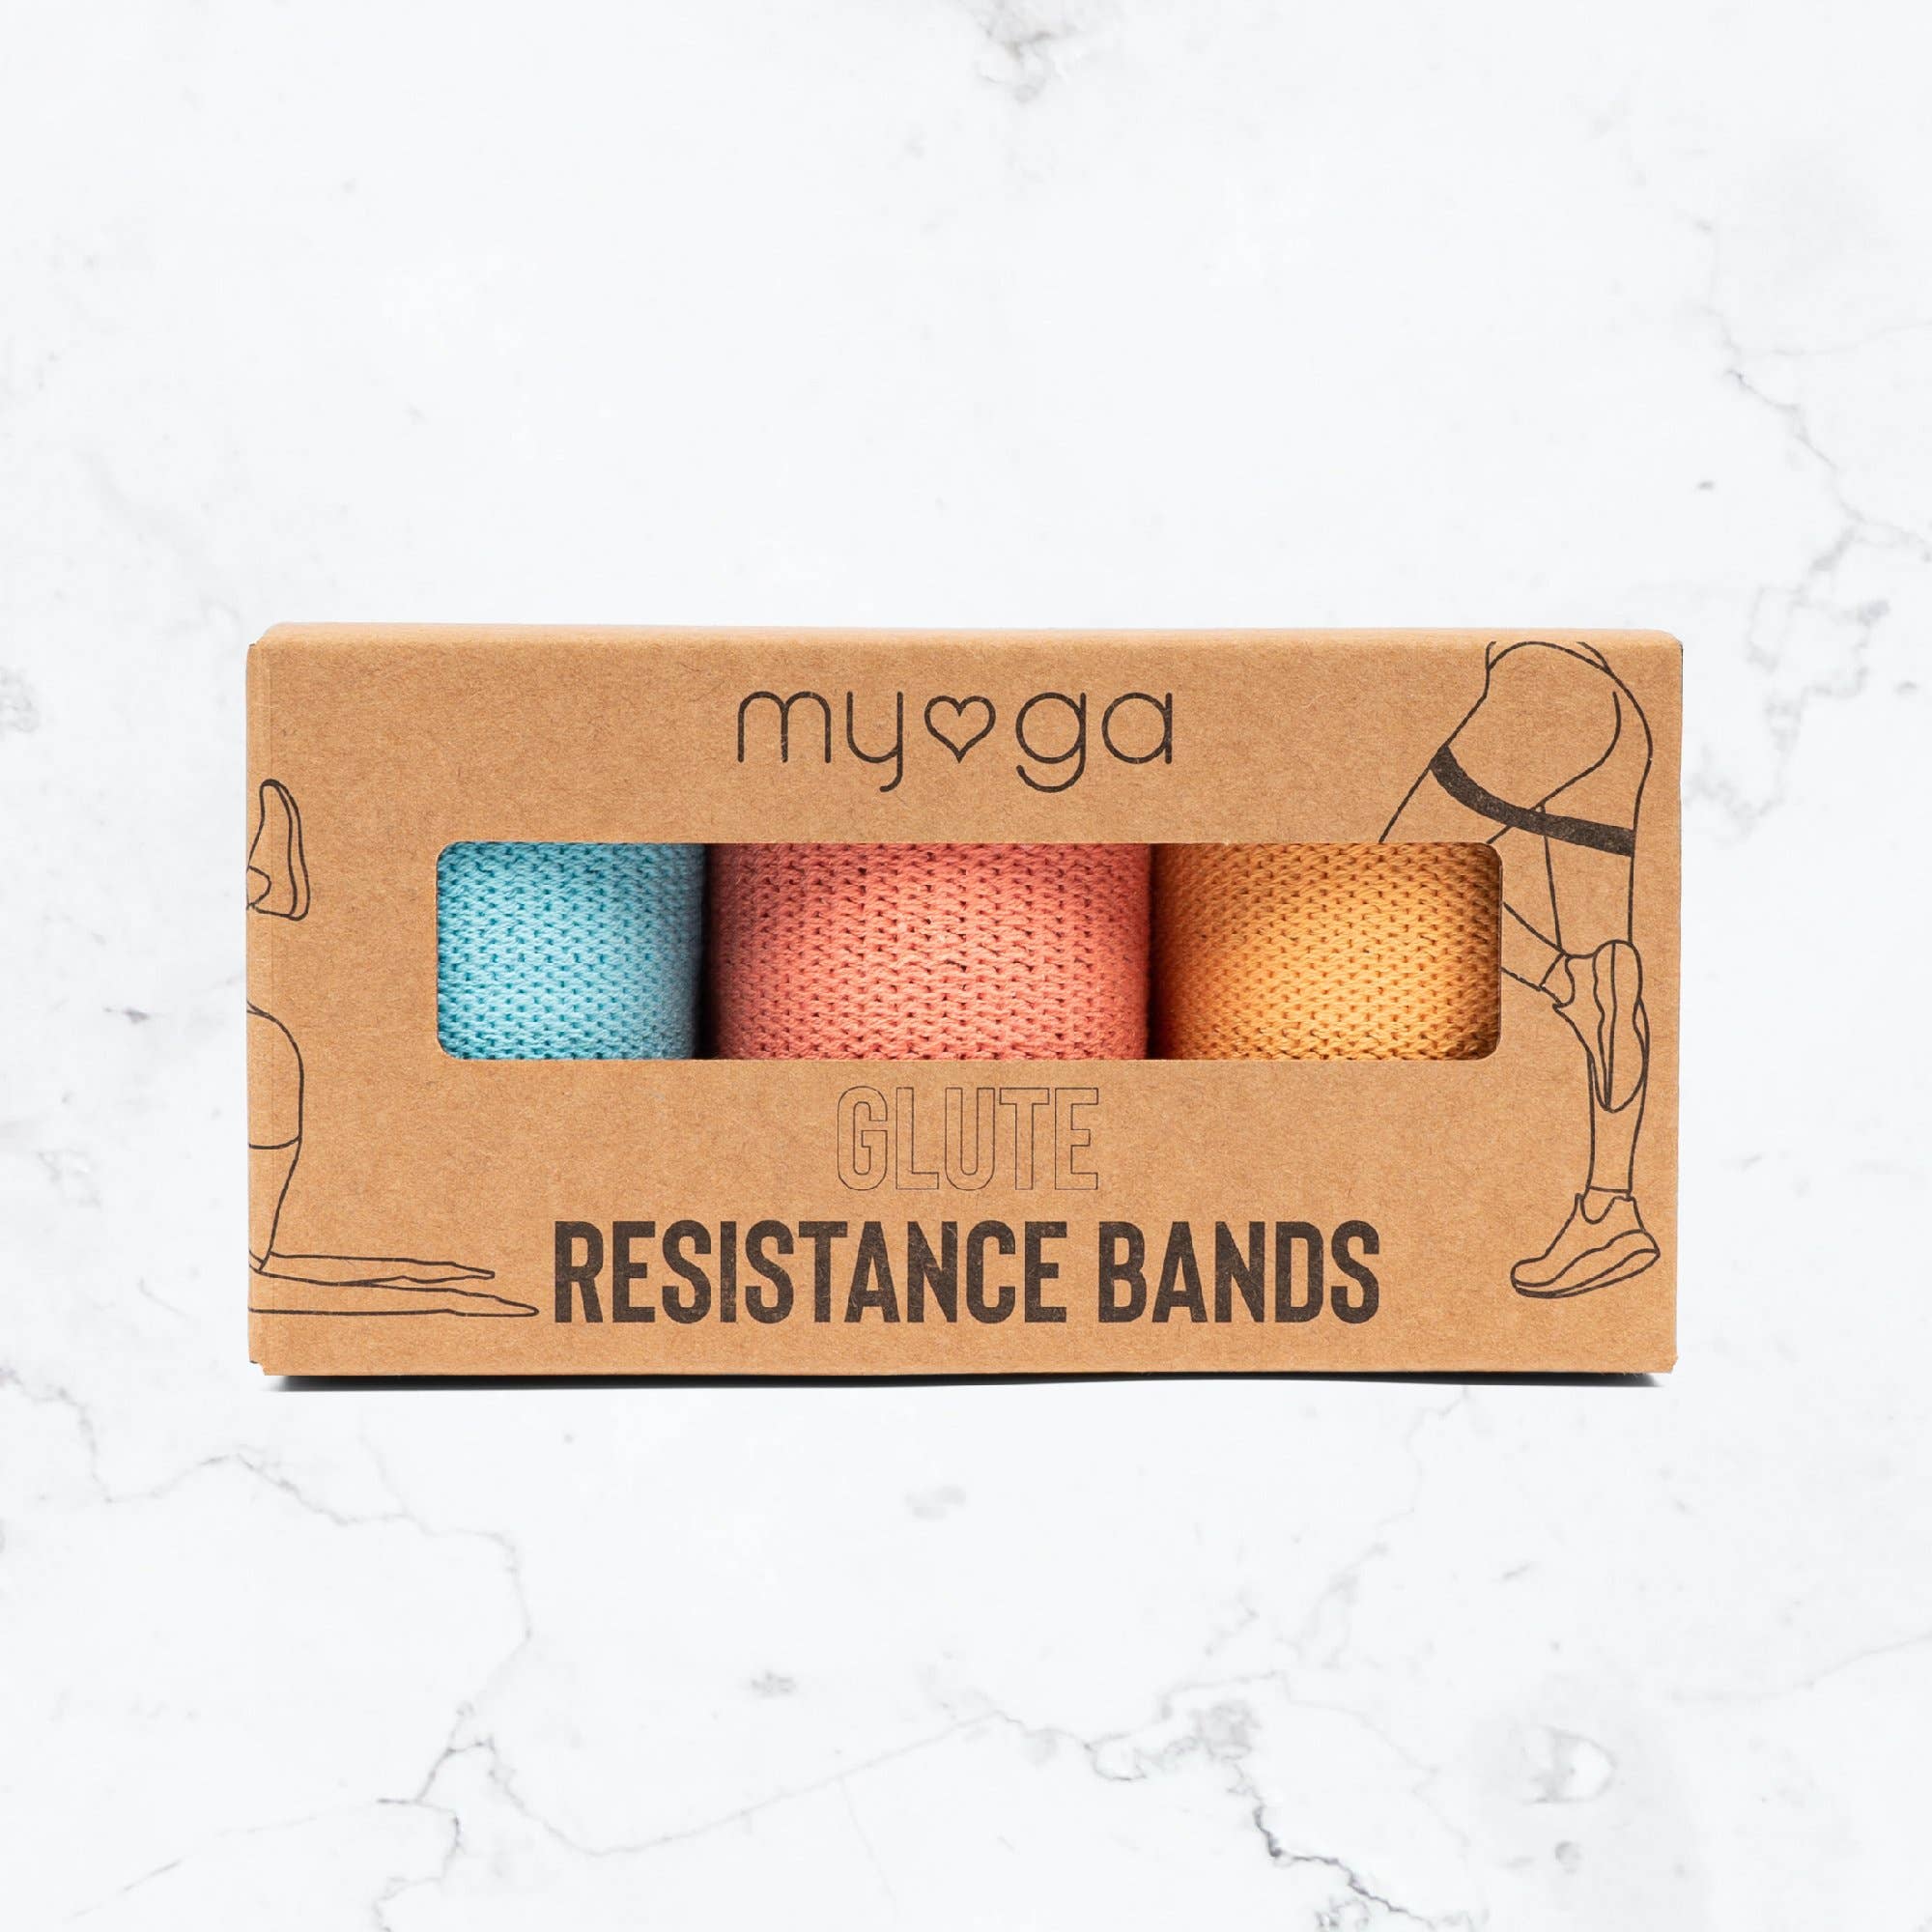 Myga - Glute Resistance Bands